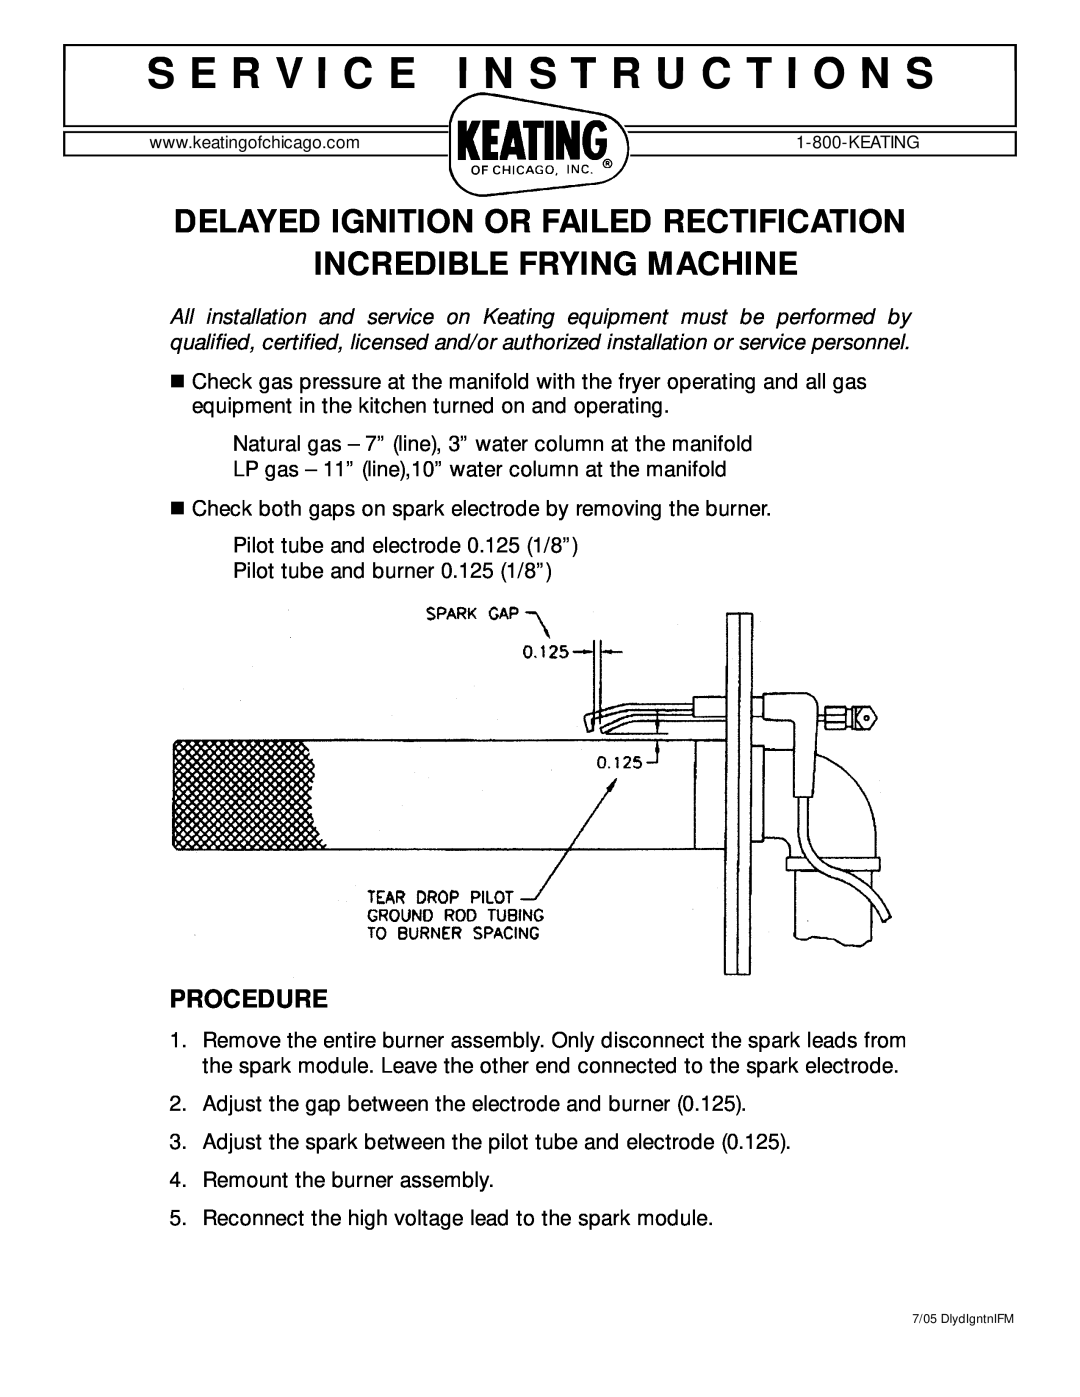 Keating Of Chicago 7/05 manual S E R V I C E I N S T R U C T I O N S, Delayed Ignition Or Failed Rectification, Procedure 